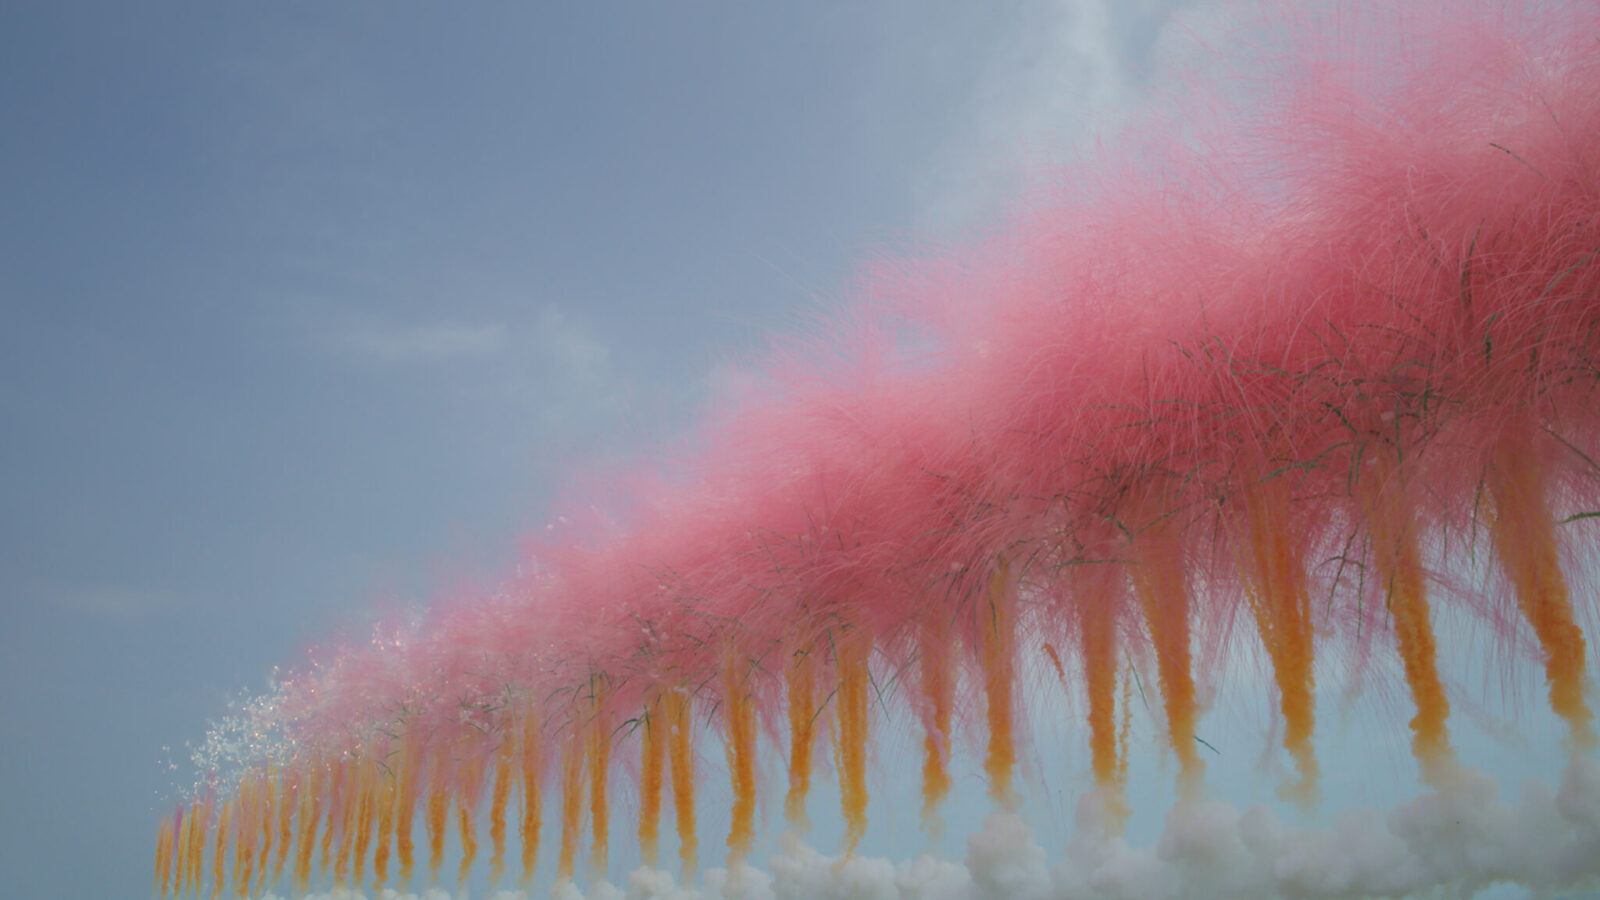 When the Sky Blooms with Sakura daytime fireworks by Cai Guo-Qiang ...